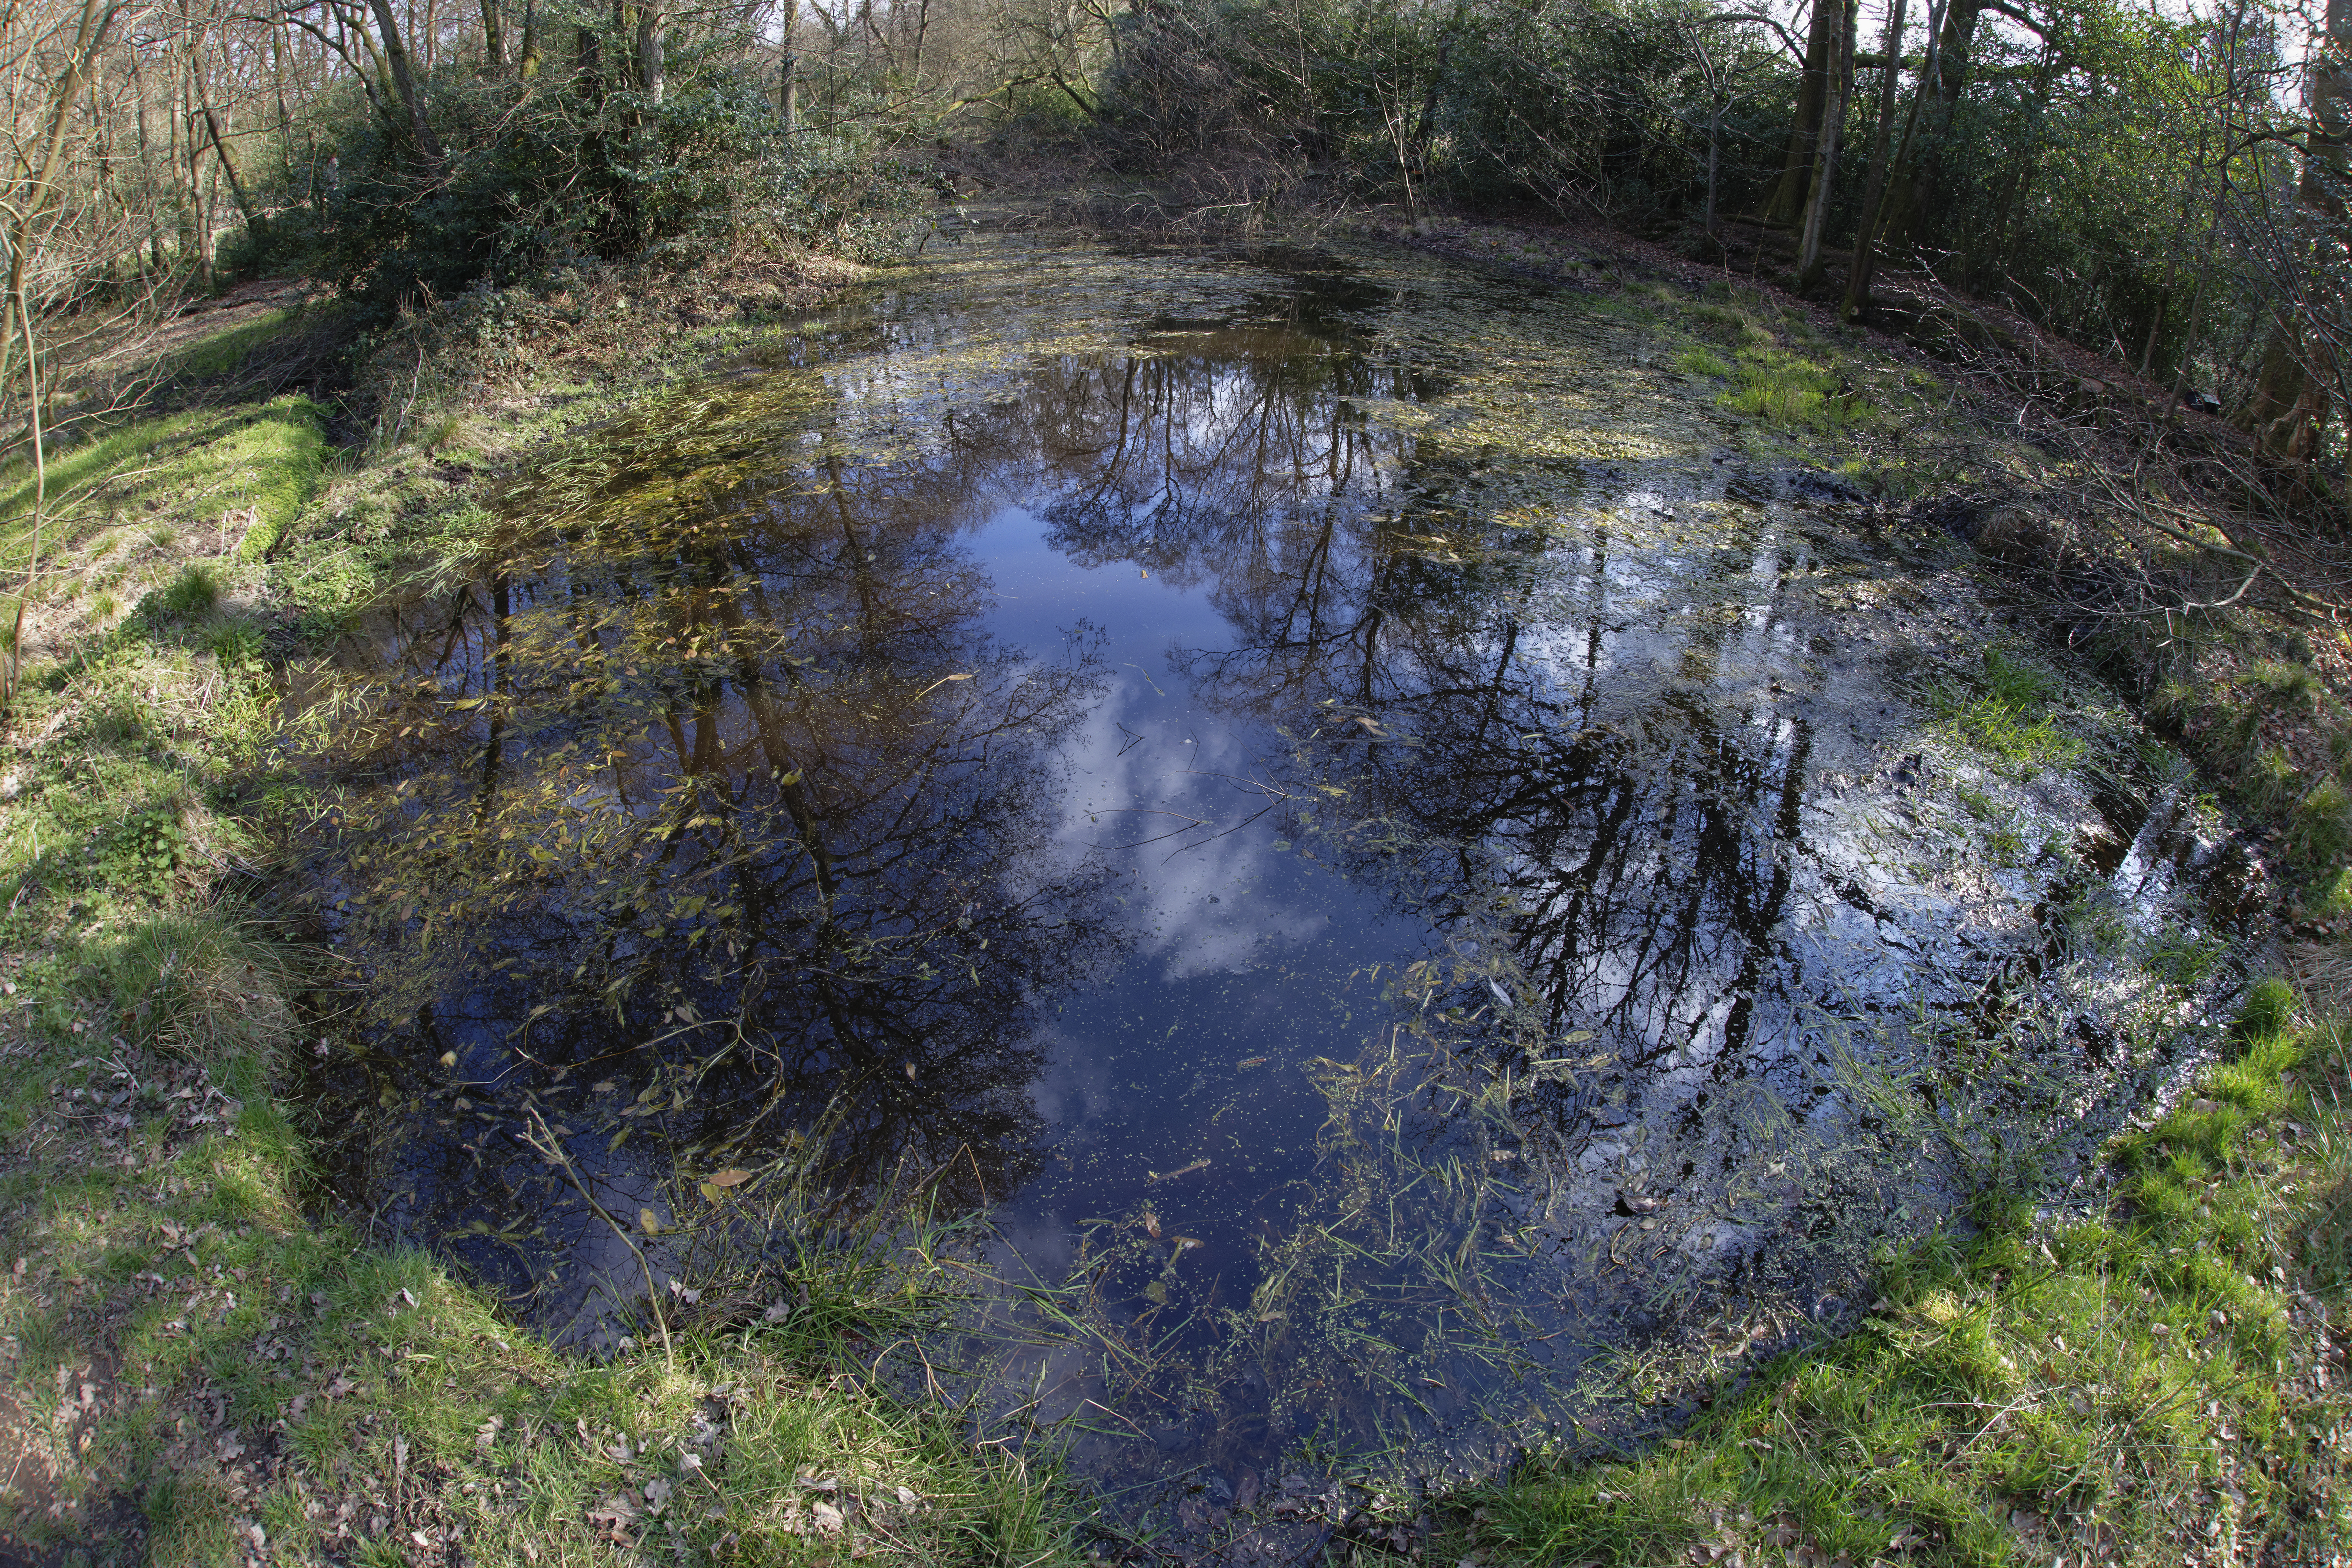 Beaver pond in a large woodland enclosure, National Trust South Downs.